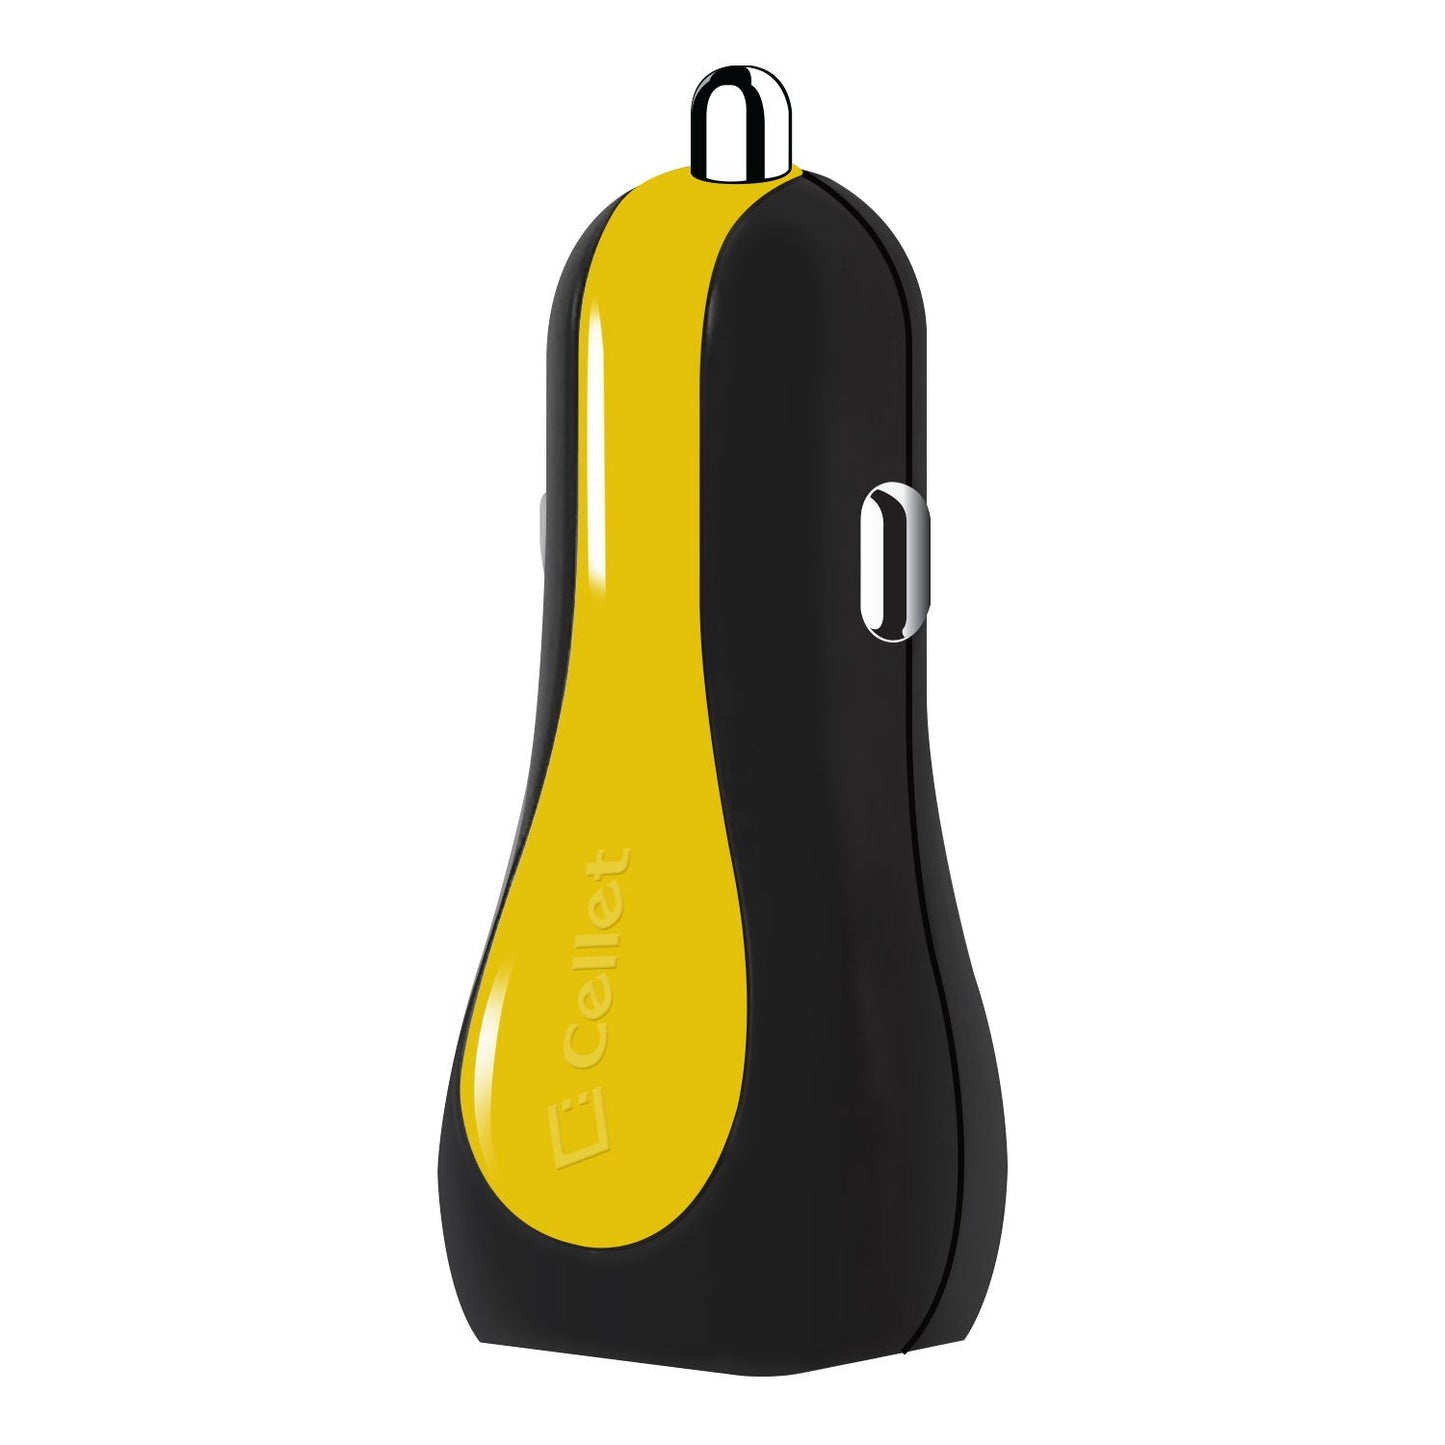 PUSBE21YL - Cellet Prism Rapid Charge 12W 2.4A Dual USB Car Charger for Android and Apple Devices - Yellow